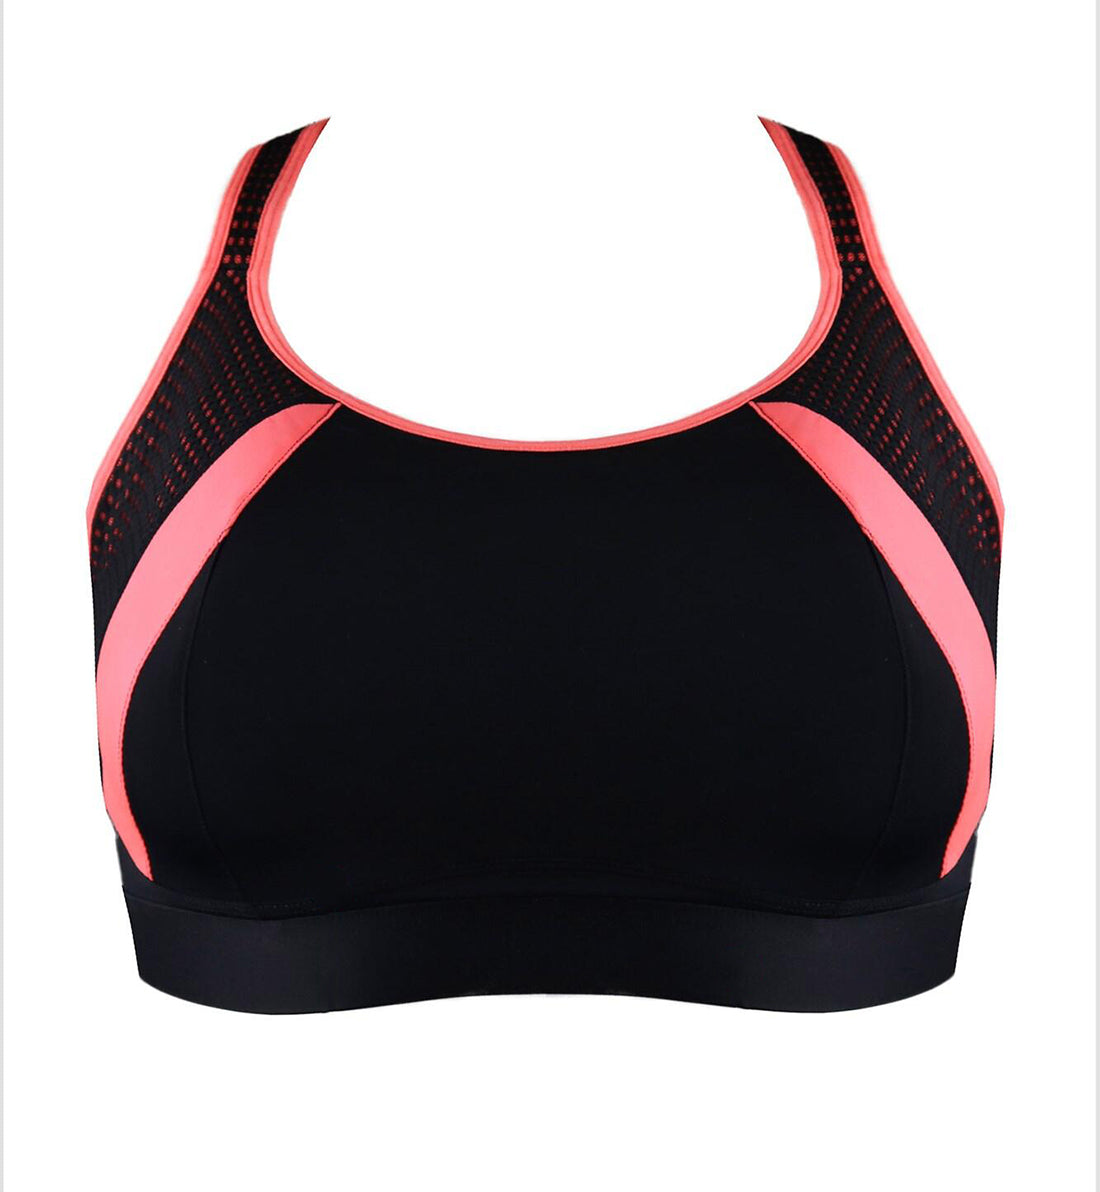 Pour Moi Energy Underwire Light Padded Cross Back Sports Bra (97005),32C,Black/Coral - Black/Coral,32C